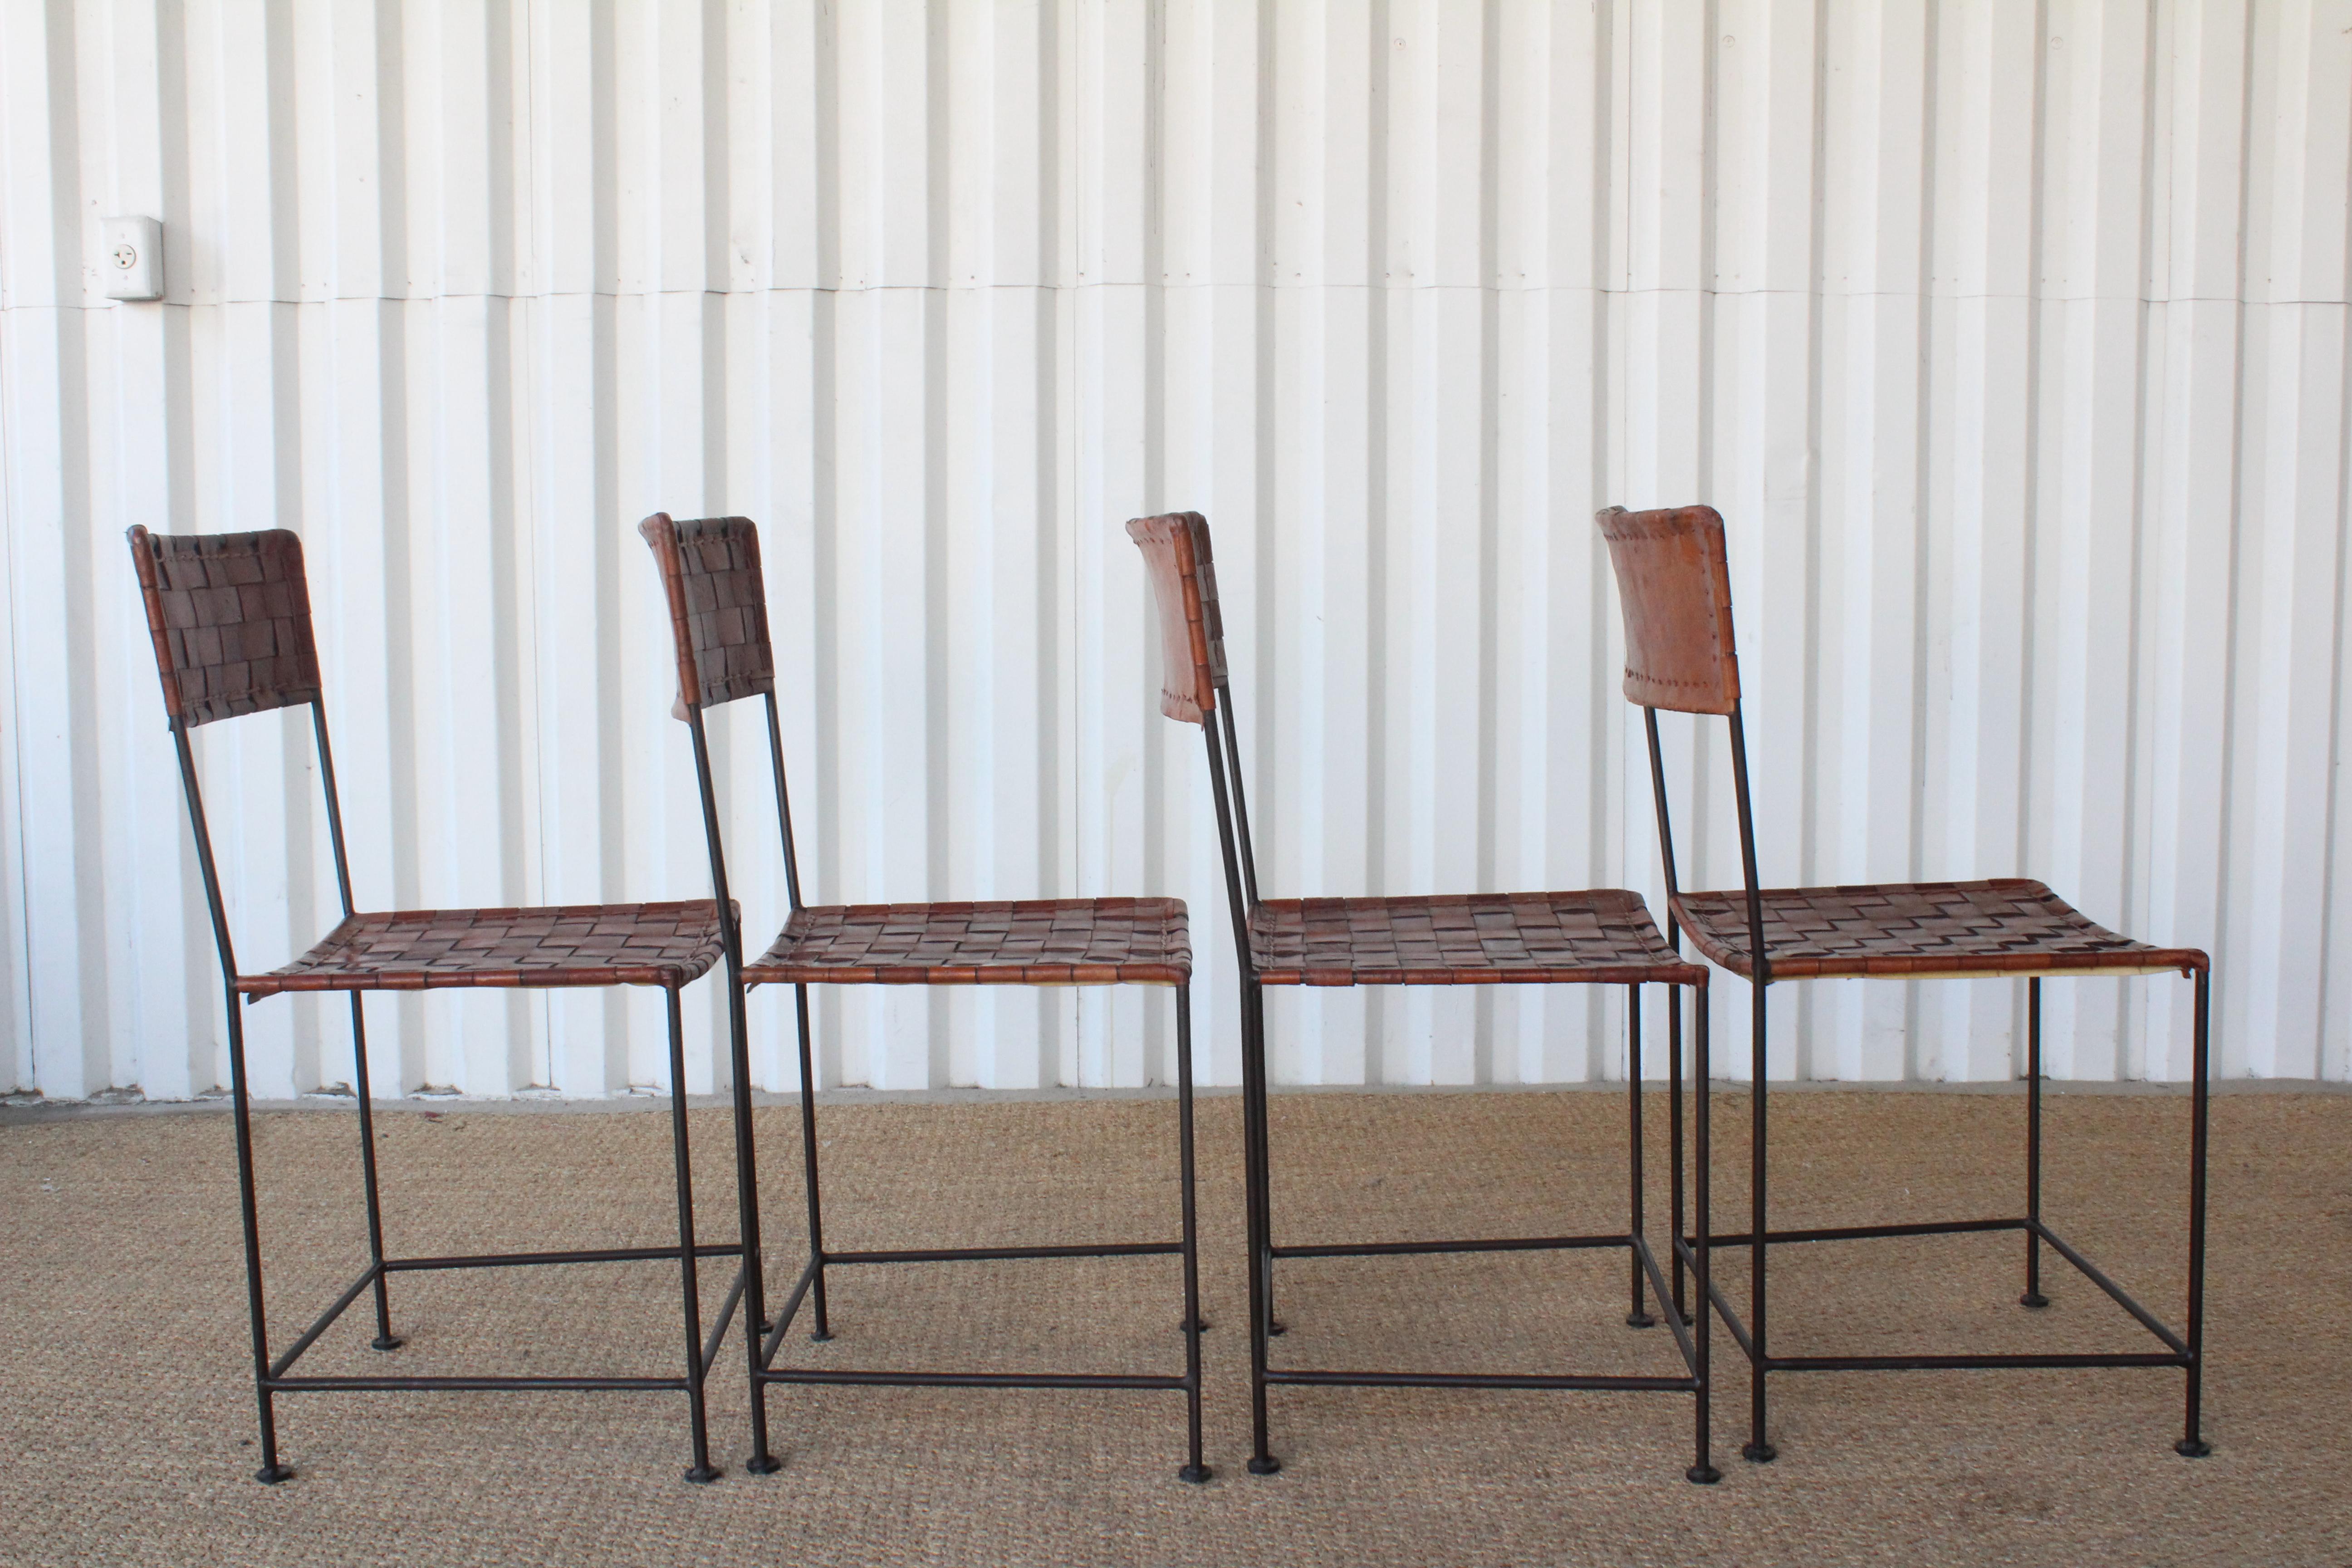 Welded Set of Four Vintage Leather and Iron Dining Chairs, France, 1960s